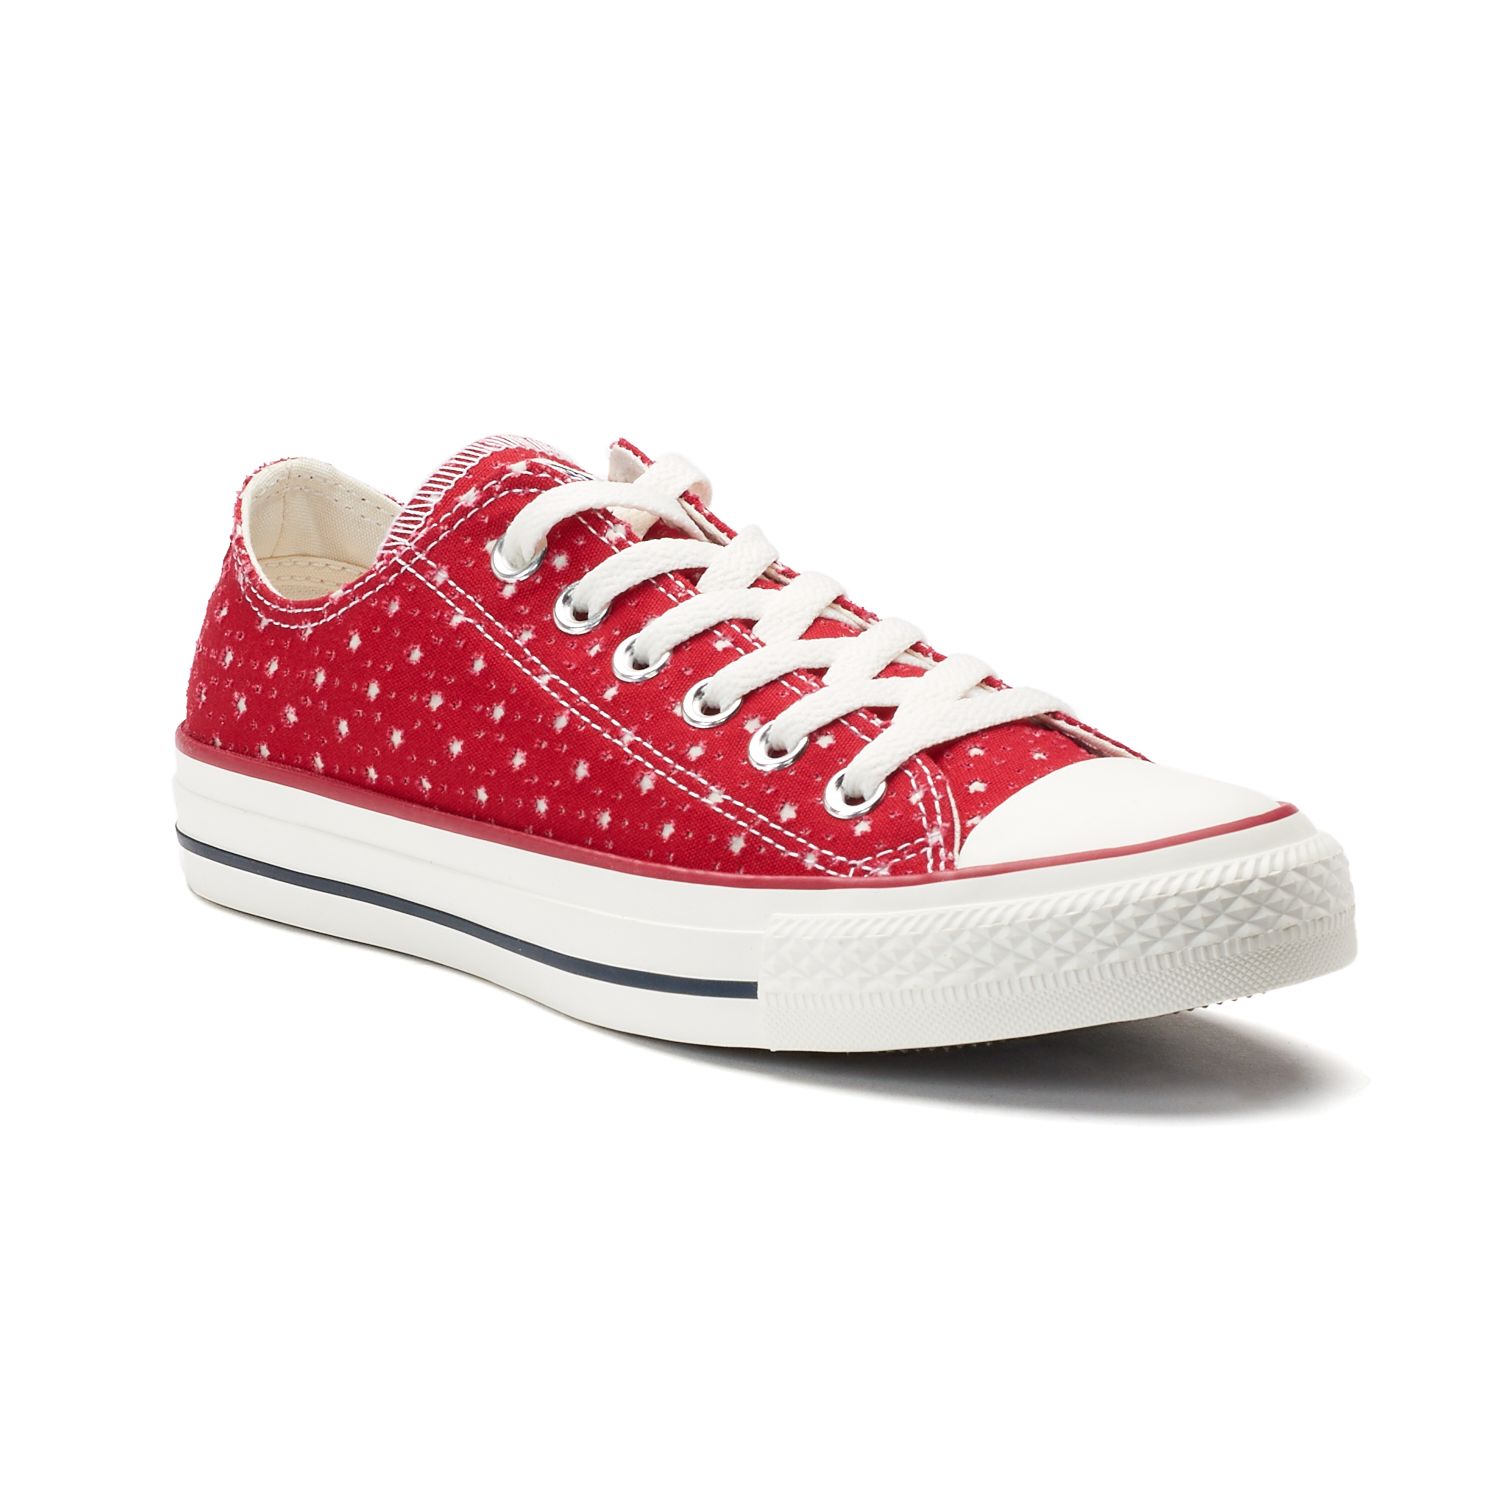 converse unisex chuck taylor perforated stars low top sneaker